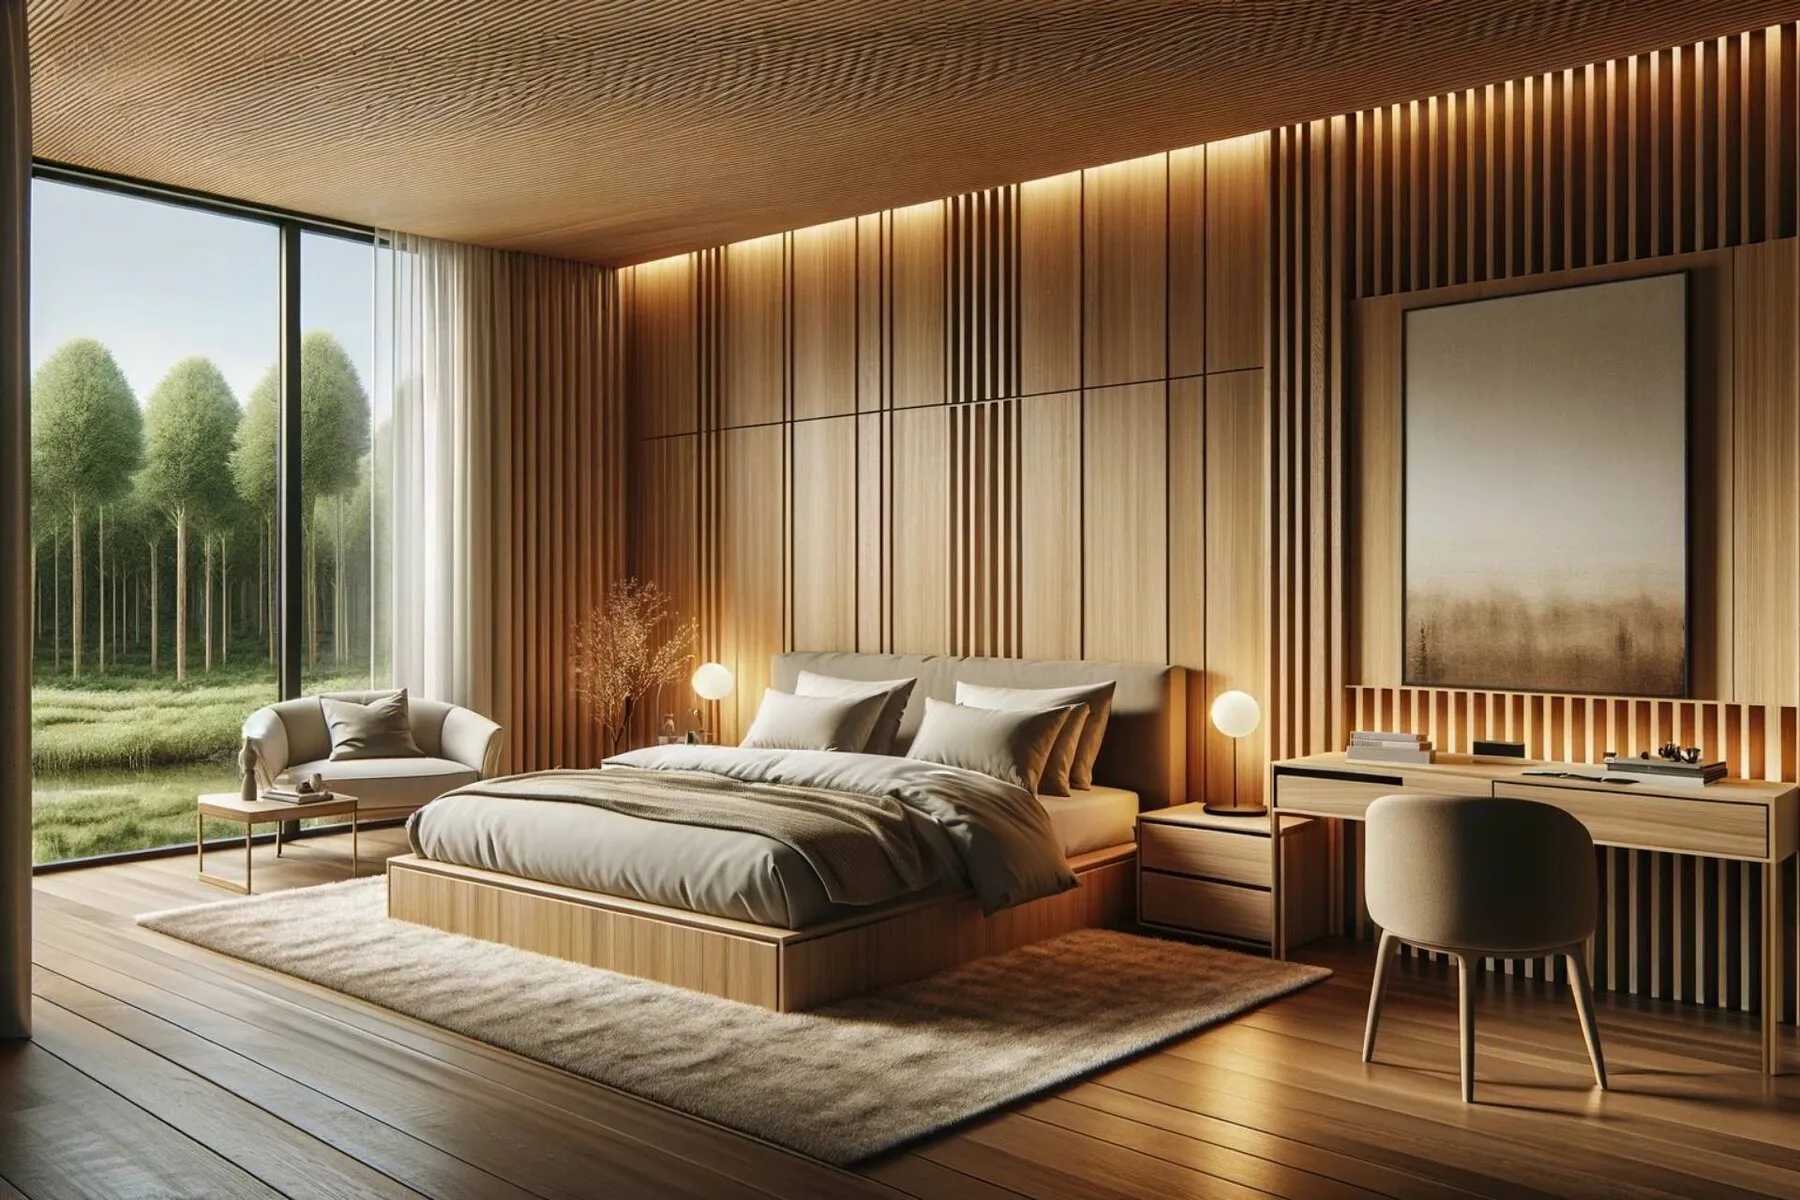 modern bedroom interior with wood paneling as the focal point of wall decor